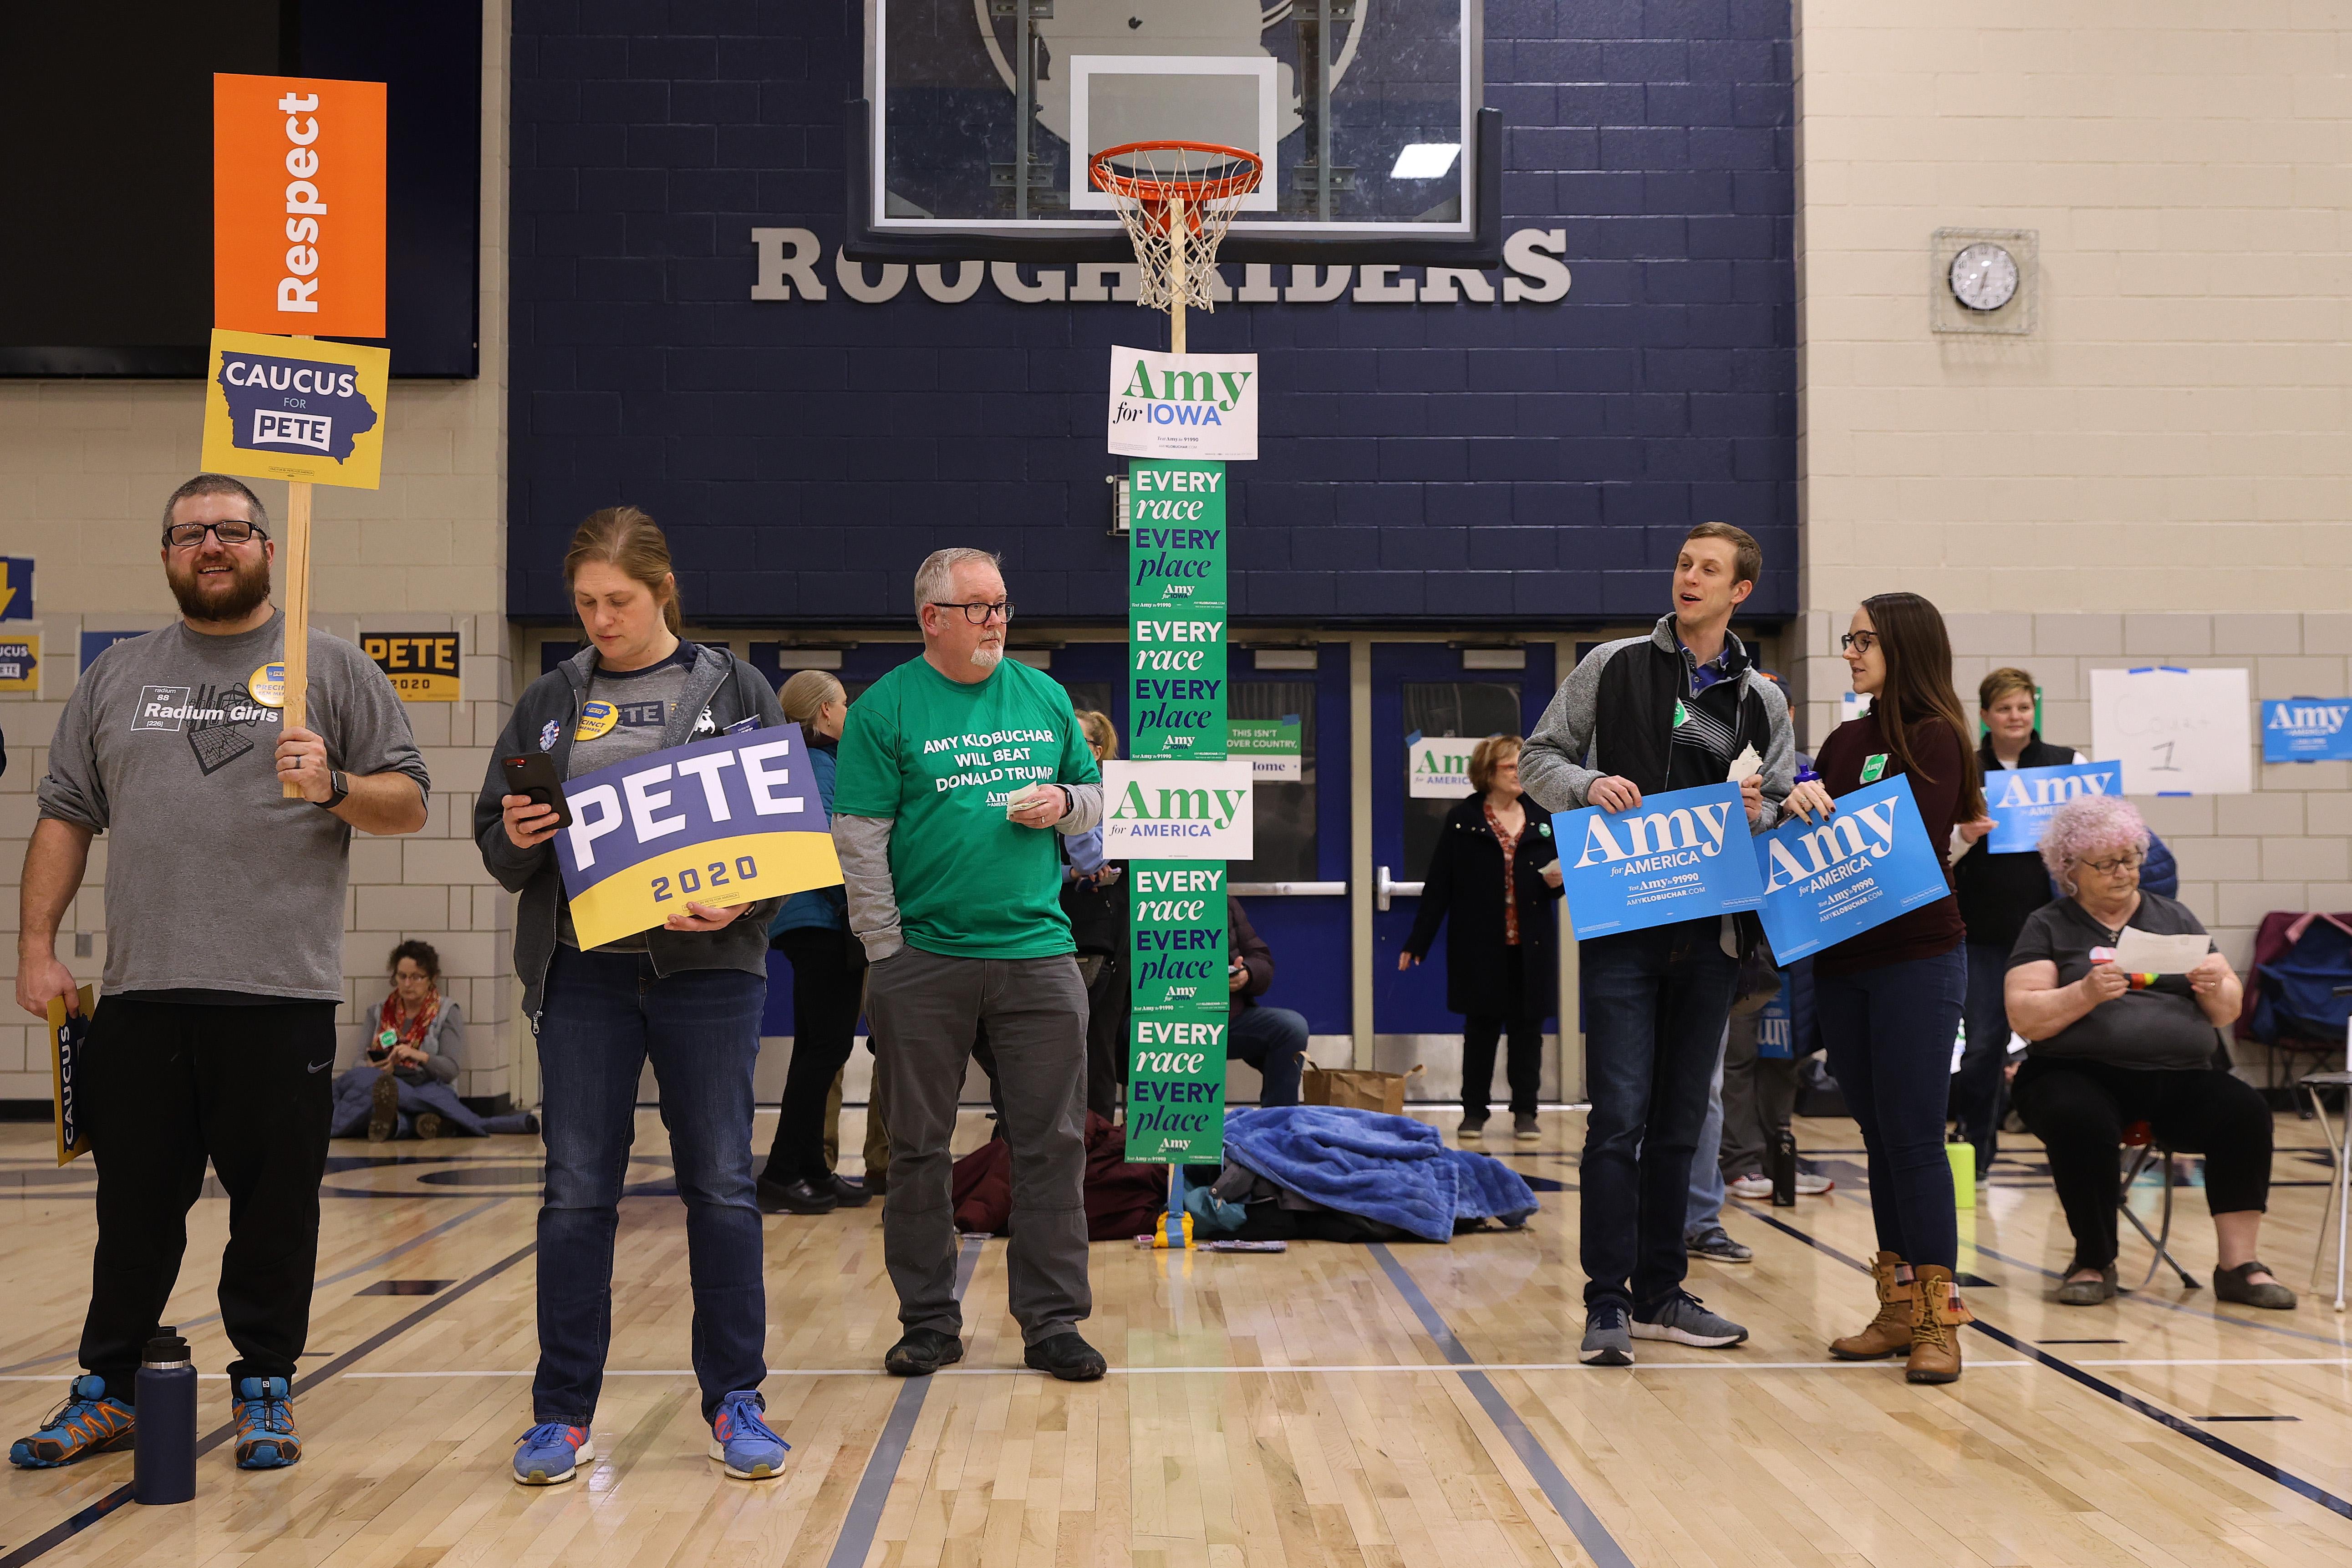 DES MOINES, IOWA - FEBRUARY 03:  Supporters of Democratic presidential candidates former South Bend, Indiana Mayor Pete Buttigieg and Sen. Amy Klobuchar (D-MN) prepare to caucus for them in the gymnasium at Roosevelt High School February 03, 2020 in Des Moines, Iowa. Iowa is the first contest in the 2020 presidential nominating process with the candidates then moving on to New Hampshire. (Photo by Chip Somodevilla/Getty Images)